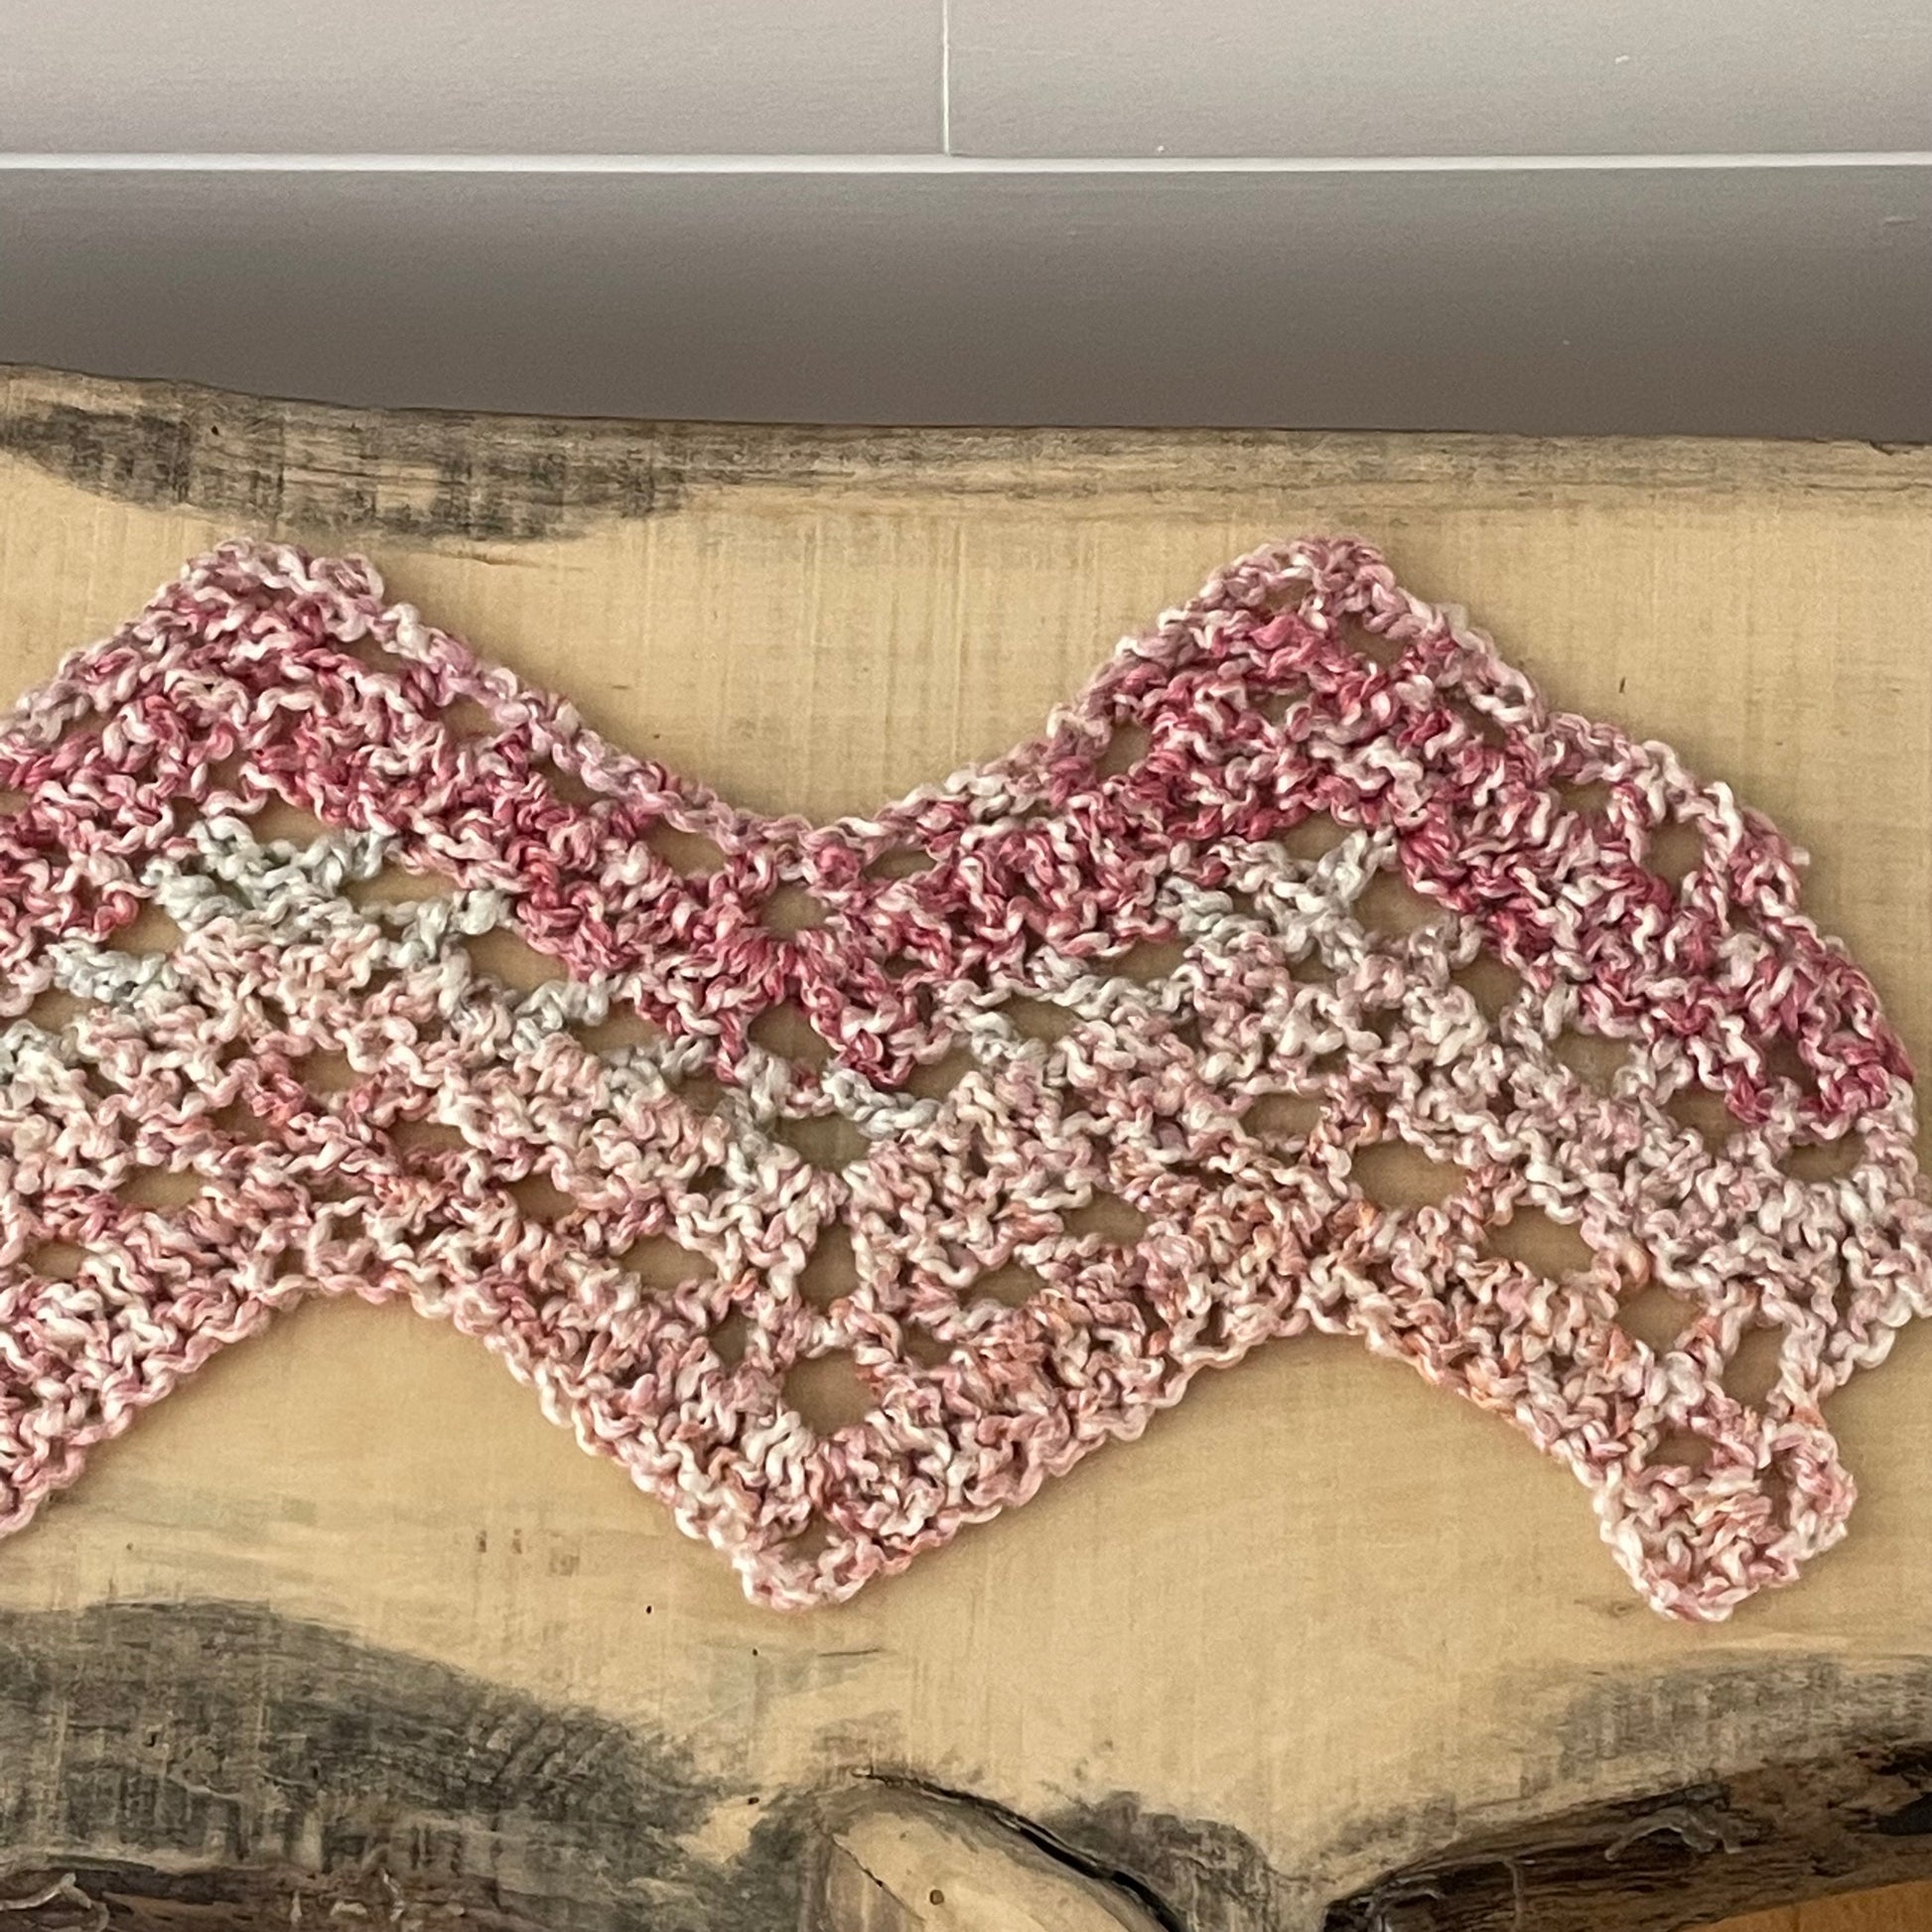 closer view of crocheted diagonal pattern of scarf.